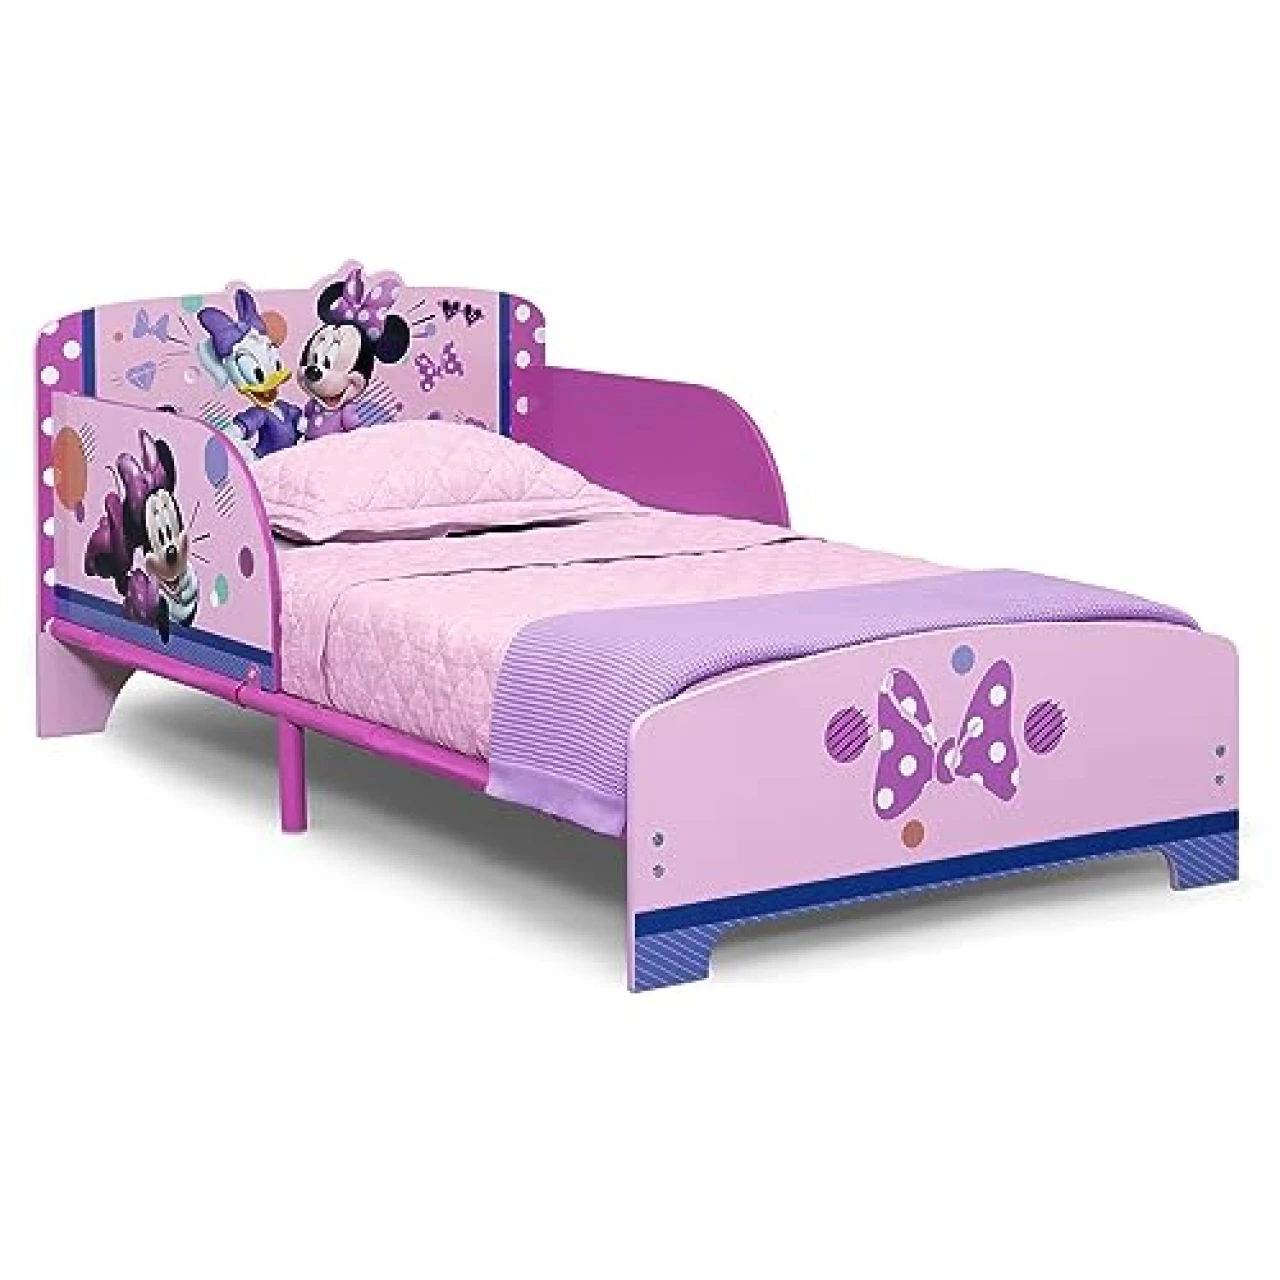 Delta Children Minnie Mouse Wood &amp; Metal Toddler Bed, Pink